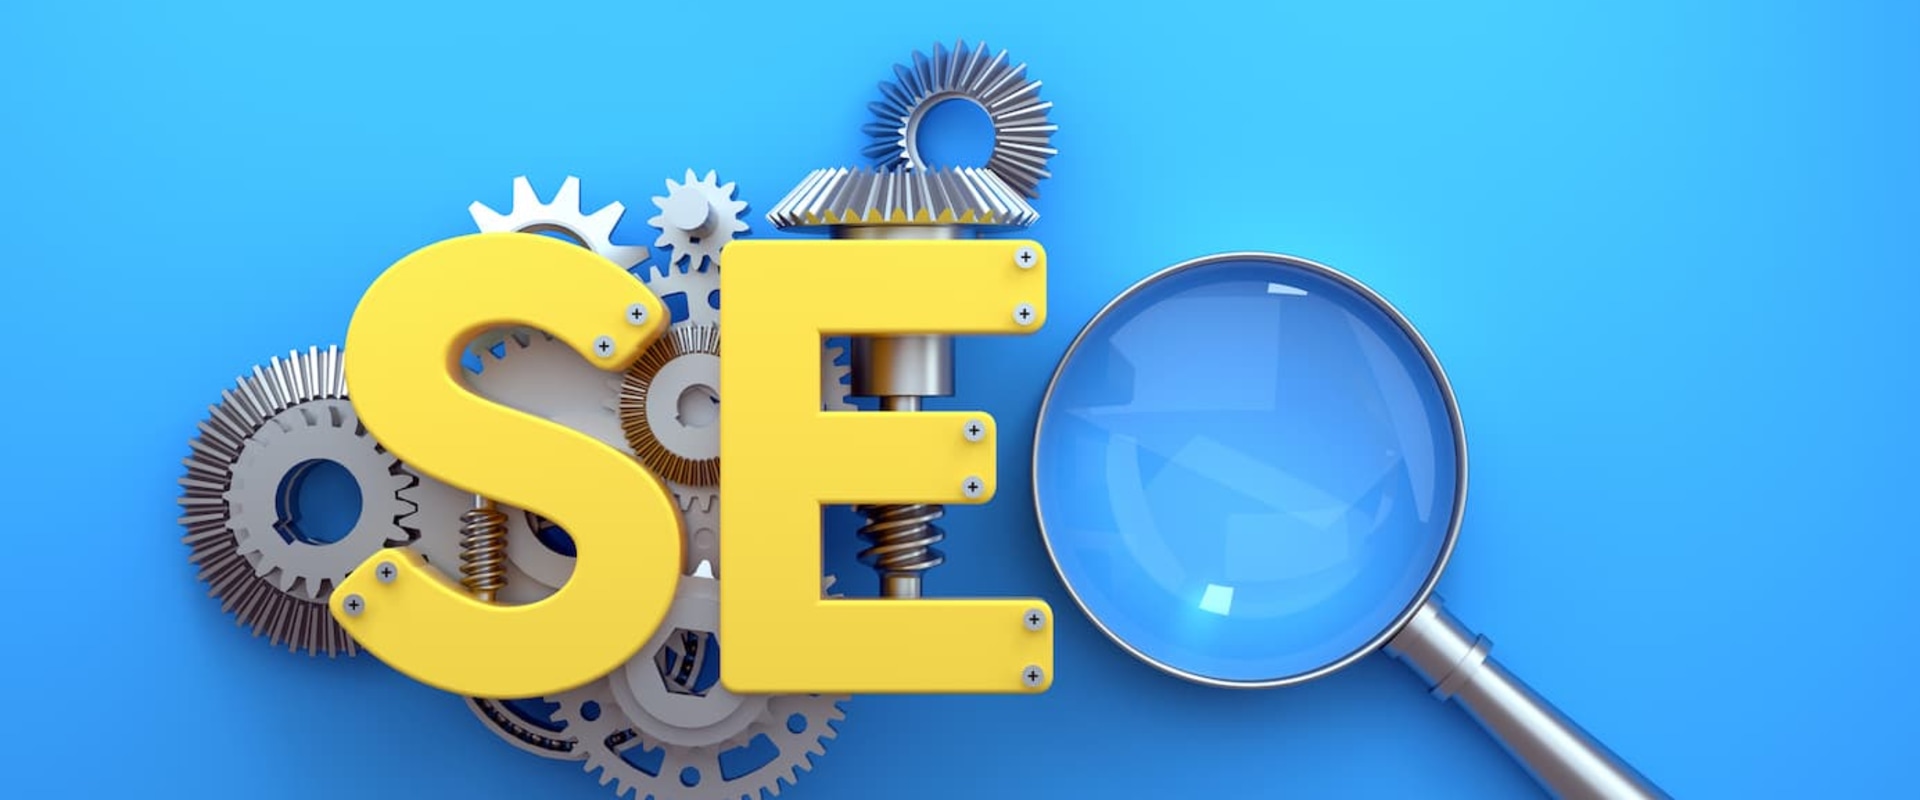 What is the best search engine optimization strategy?